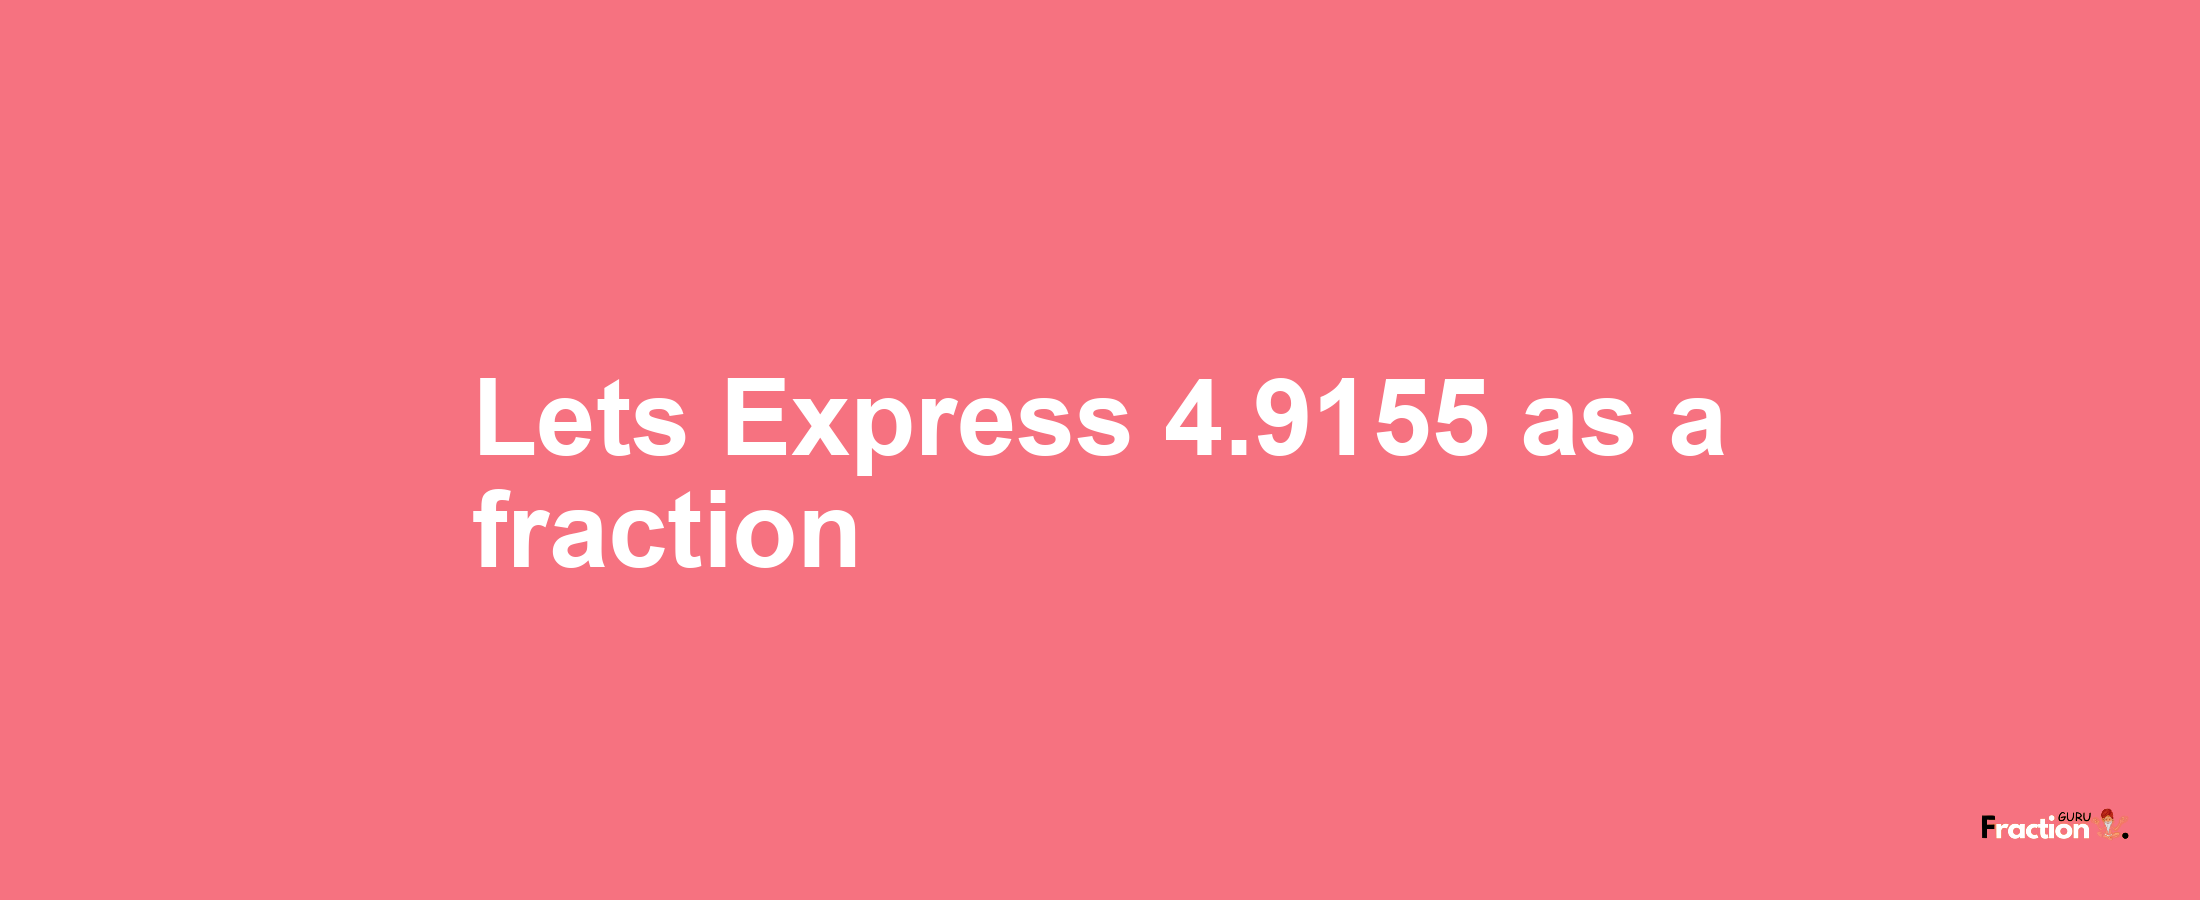 Lets Express 4.9155 as afraction